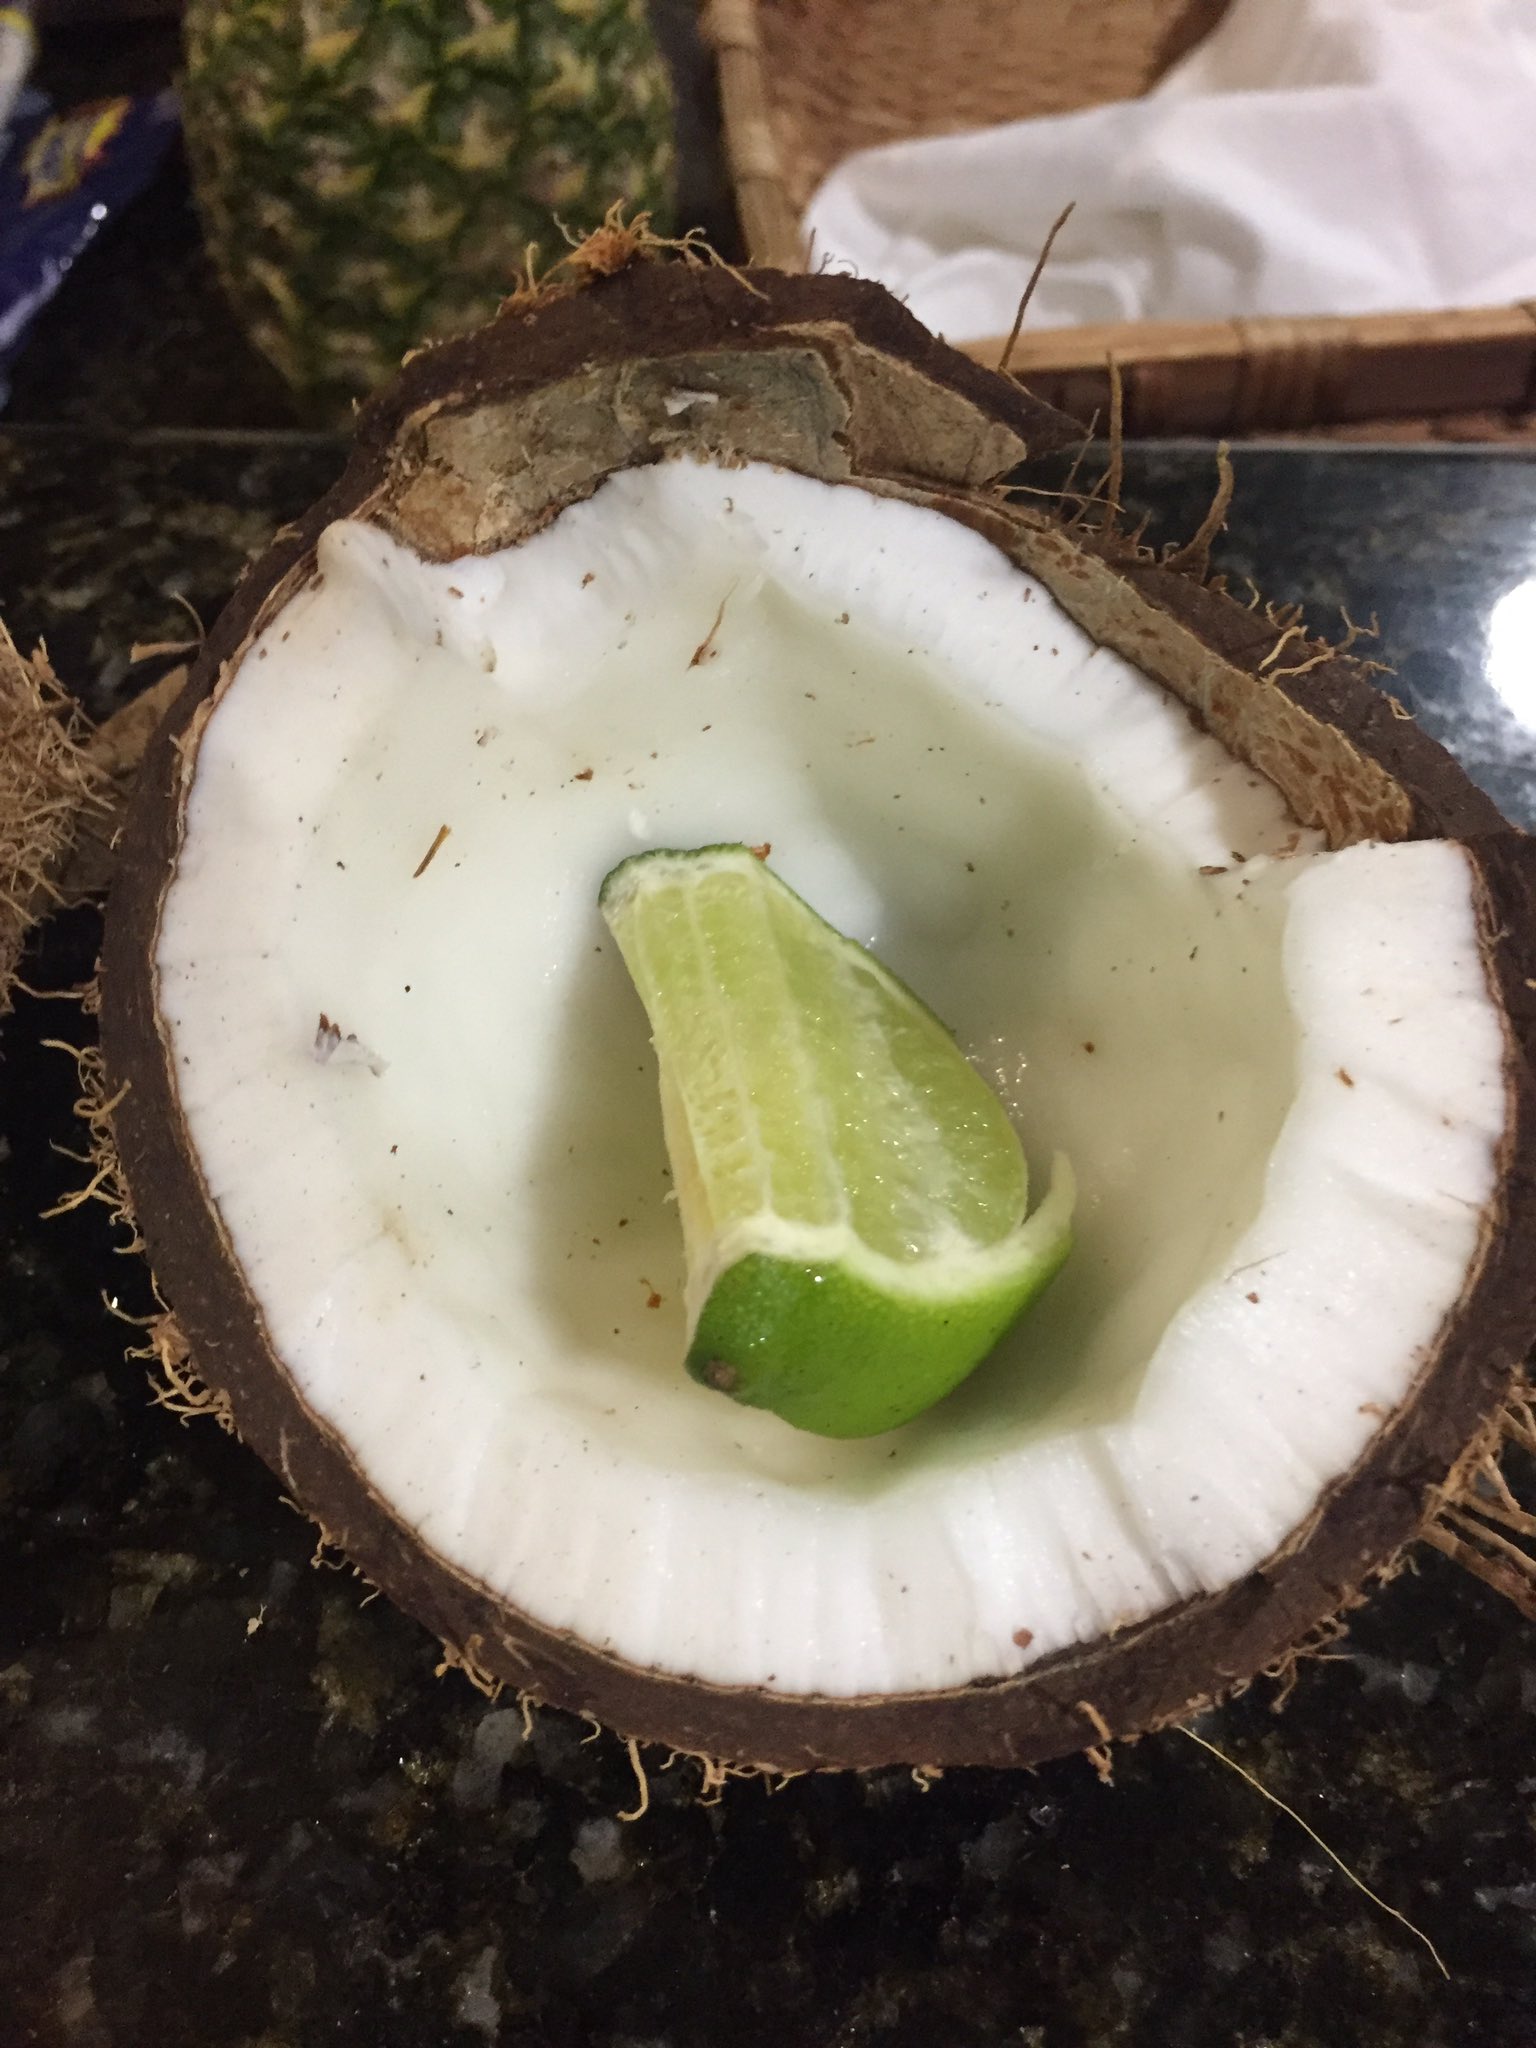 Lime in the Coconut